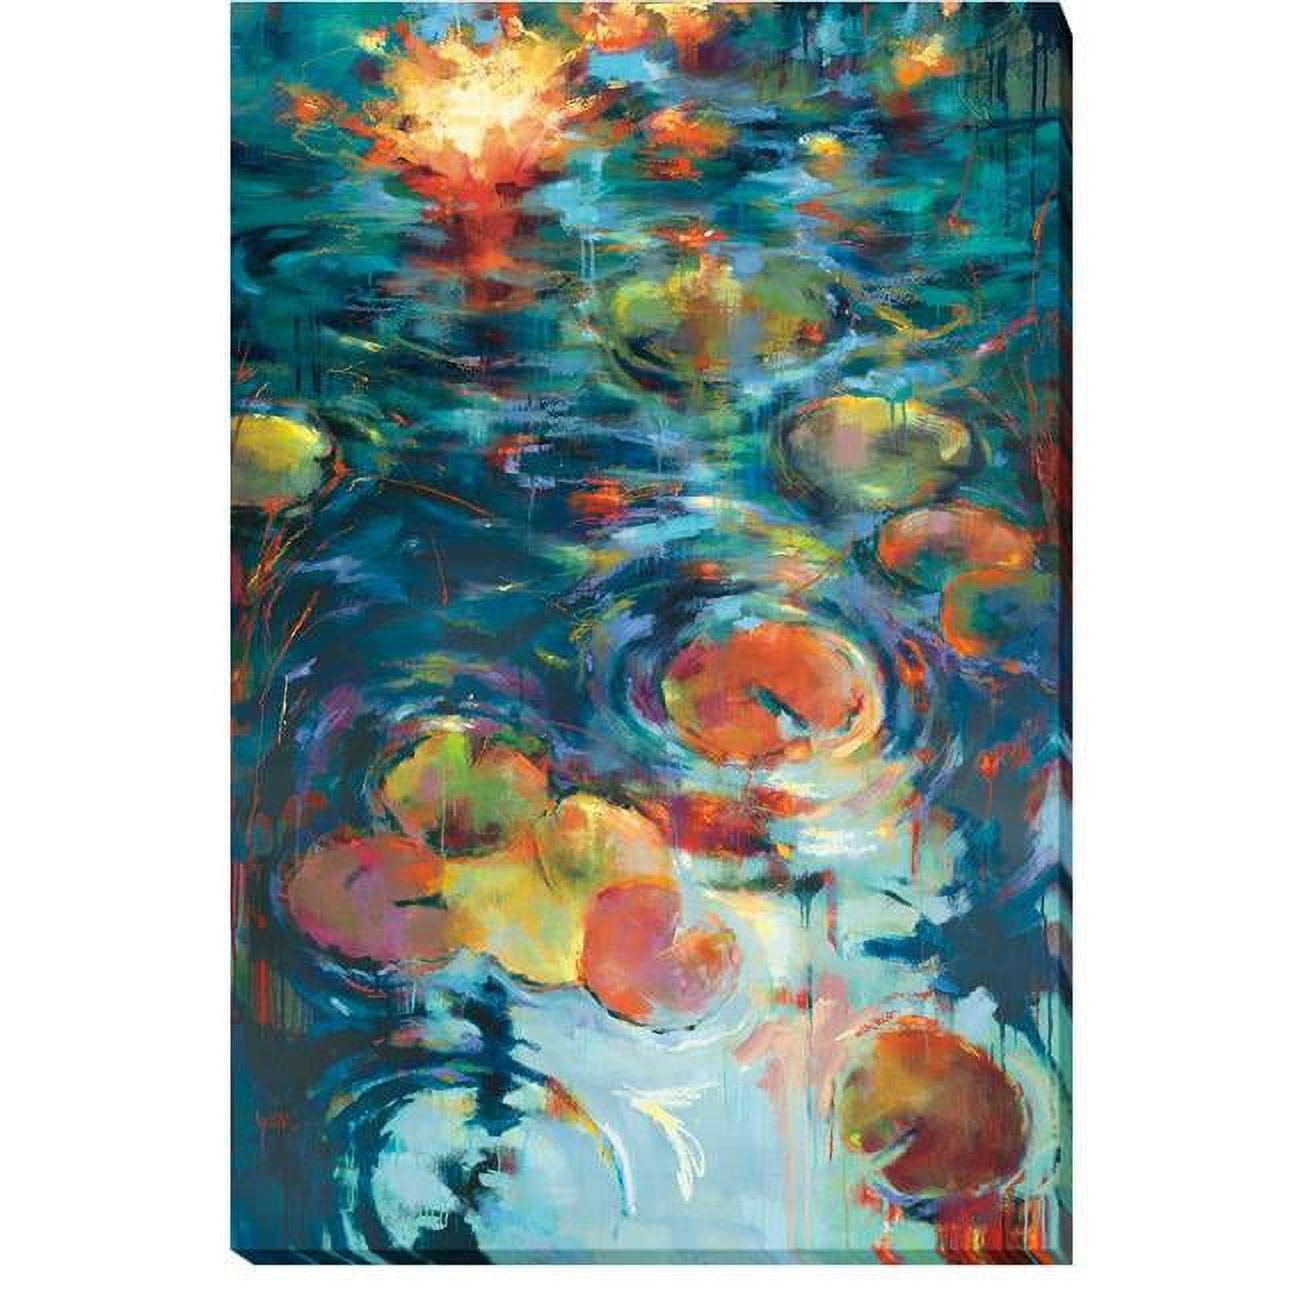 3045b643cg Dancing On The Water By Donna Young Premium Oversize Gallery-wrapped Canvas Giclee Art - 45 X 30 X 1.5 In.